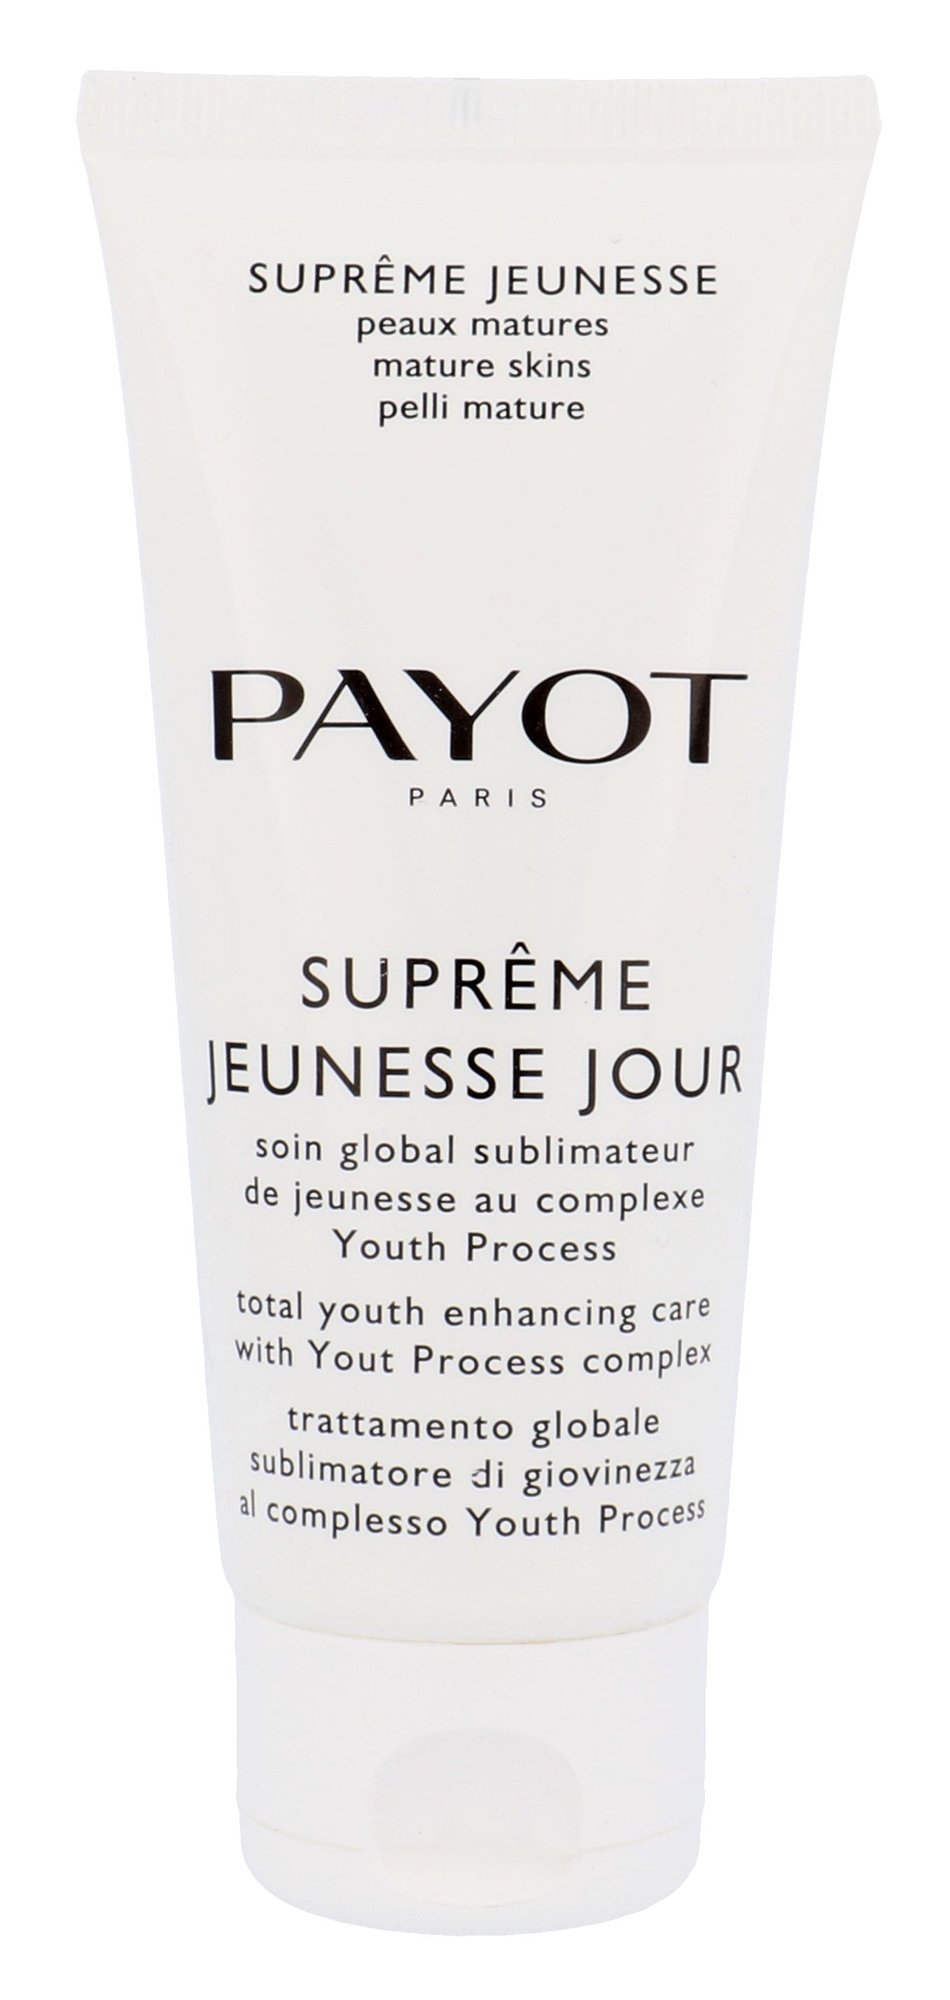 Payot Supreme Jeunesse Jour Total Youth Enhancing Care